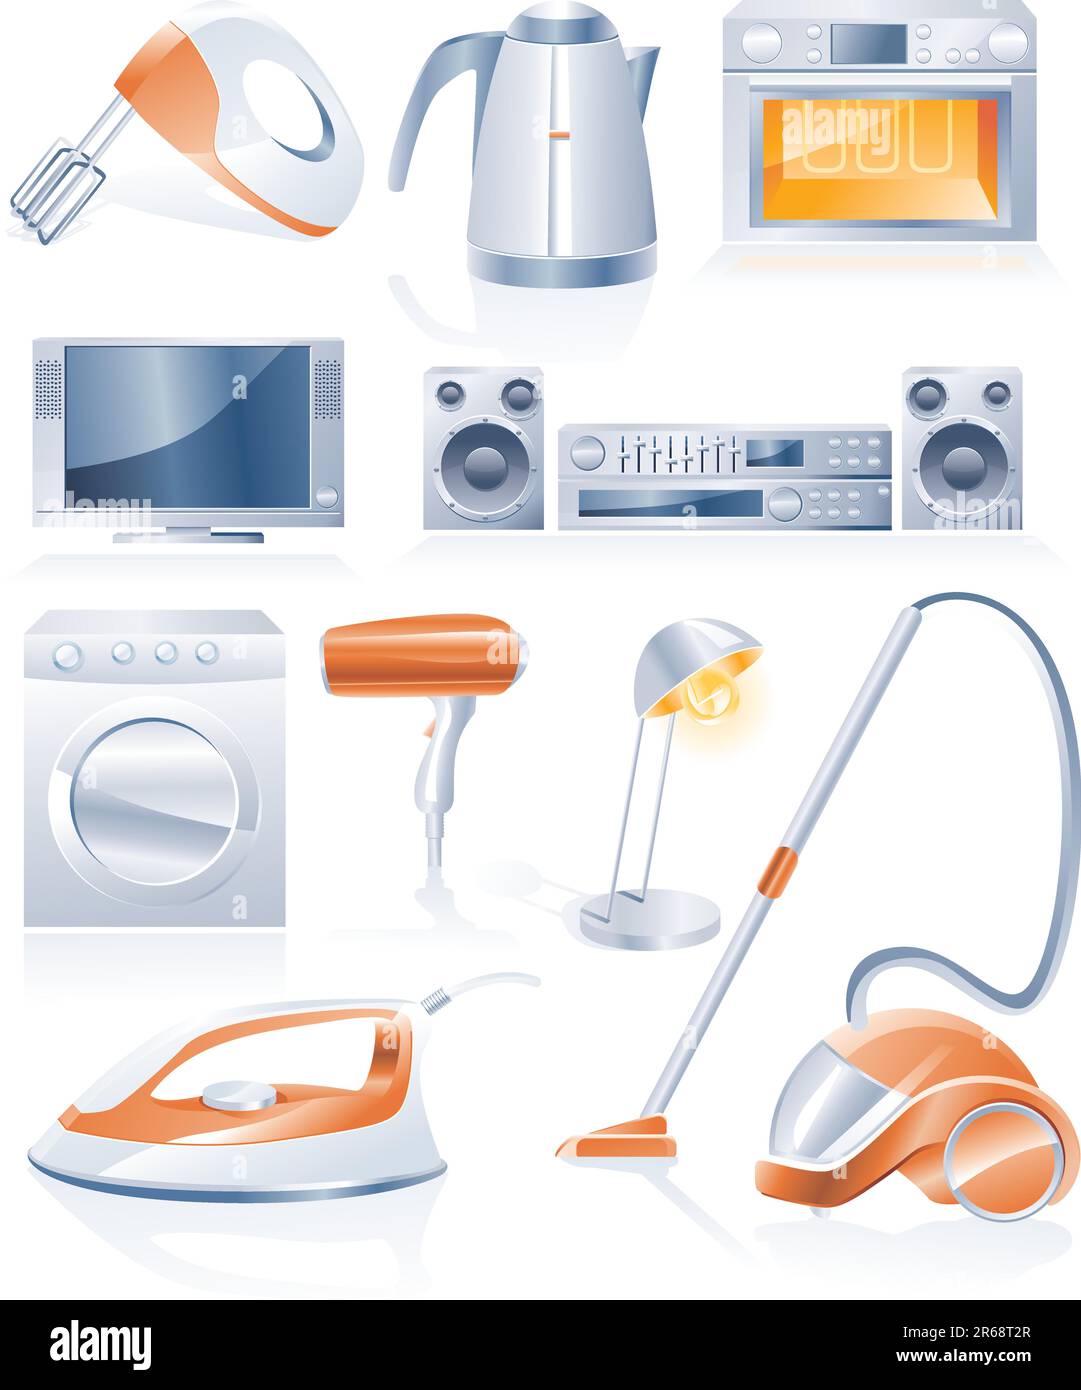 Set of household appliances in orange and blue colors Stock Vector